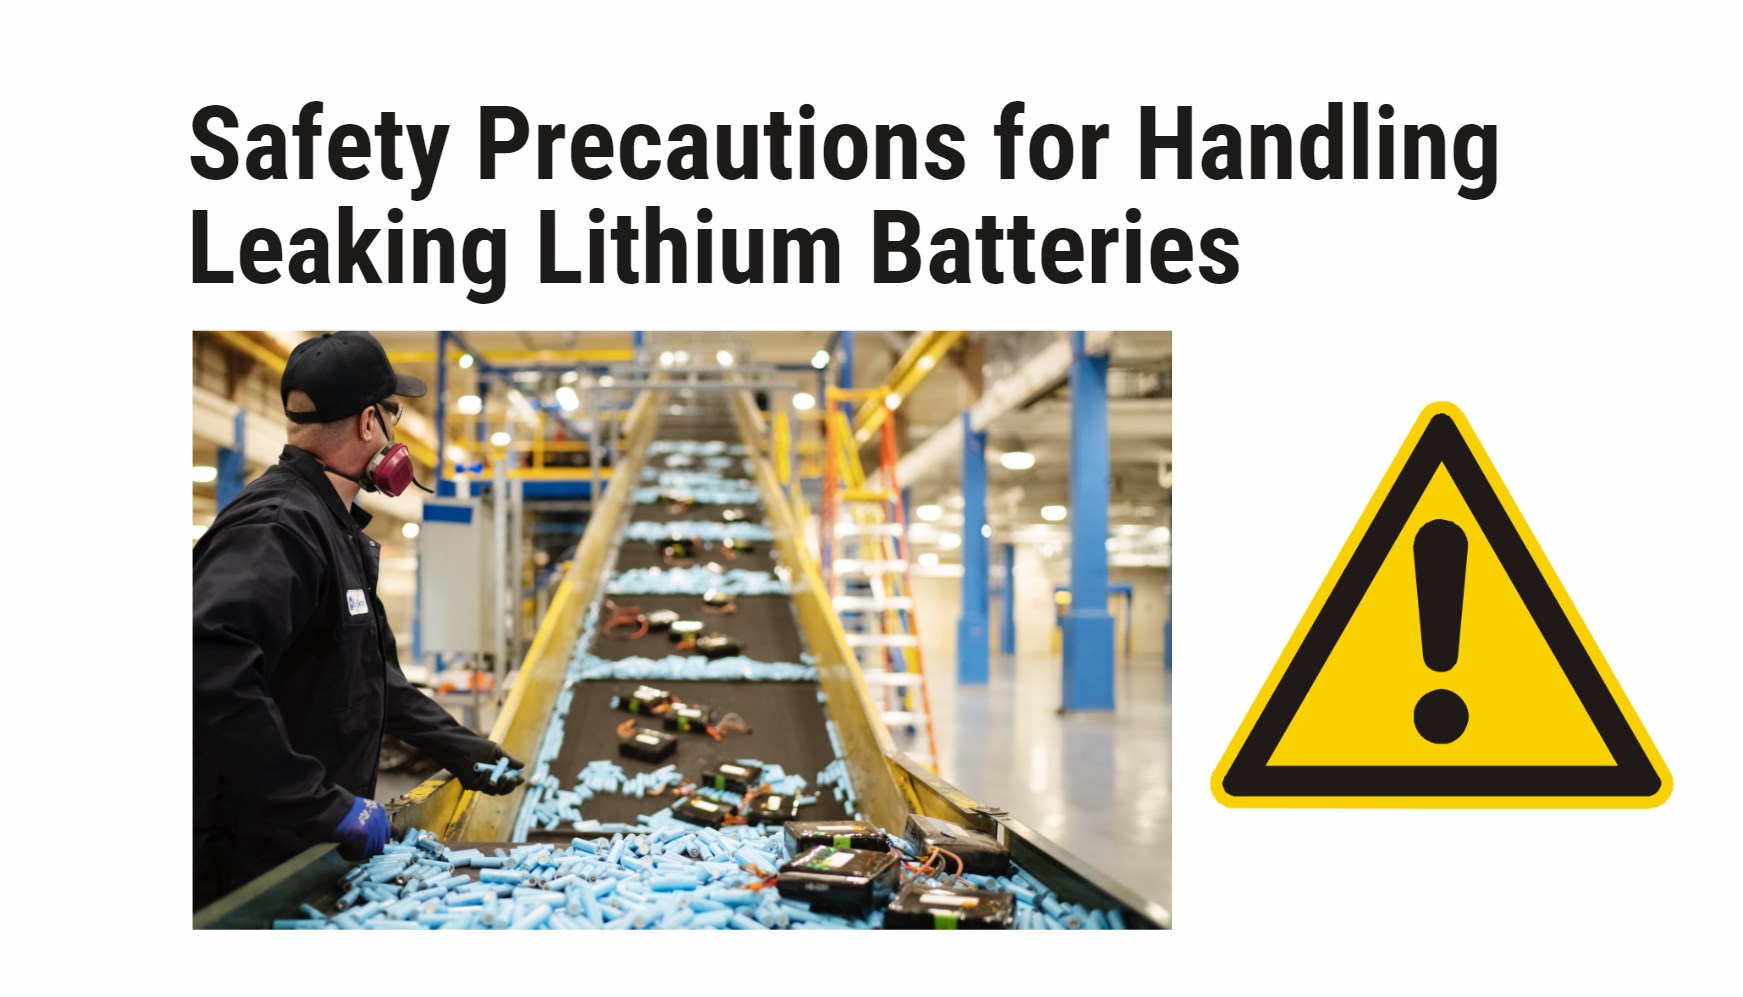 Safety Precautions for Handling Leaking Lithium Batteries